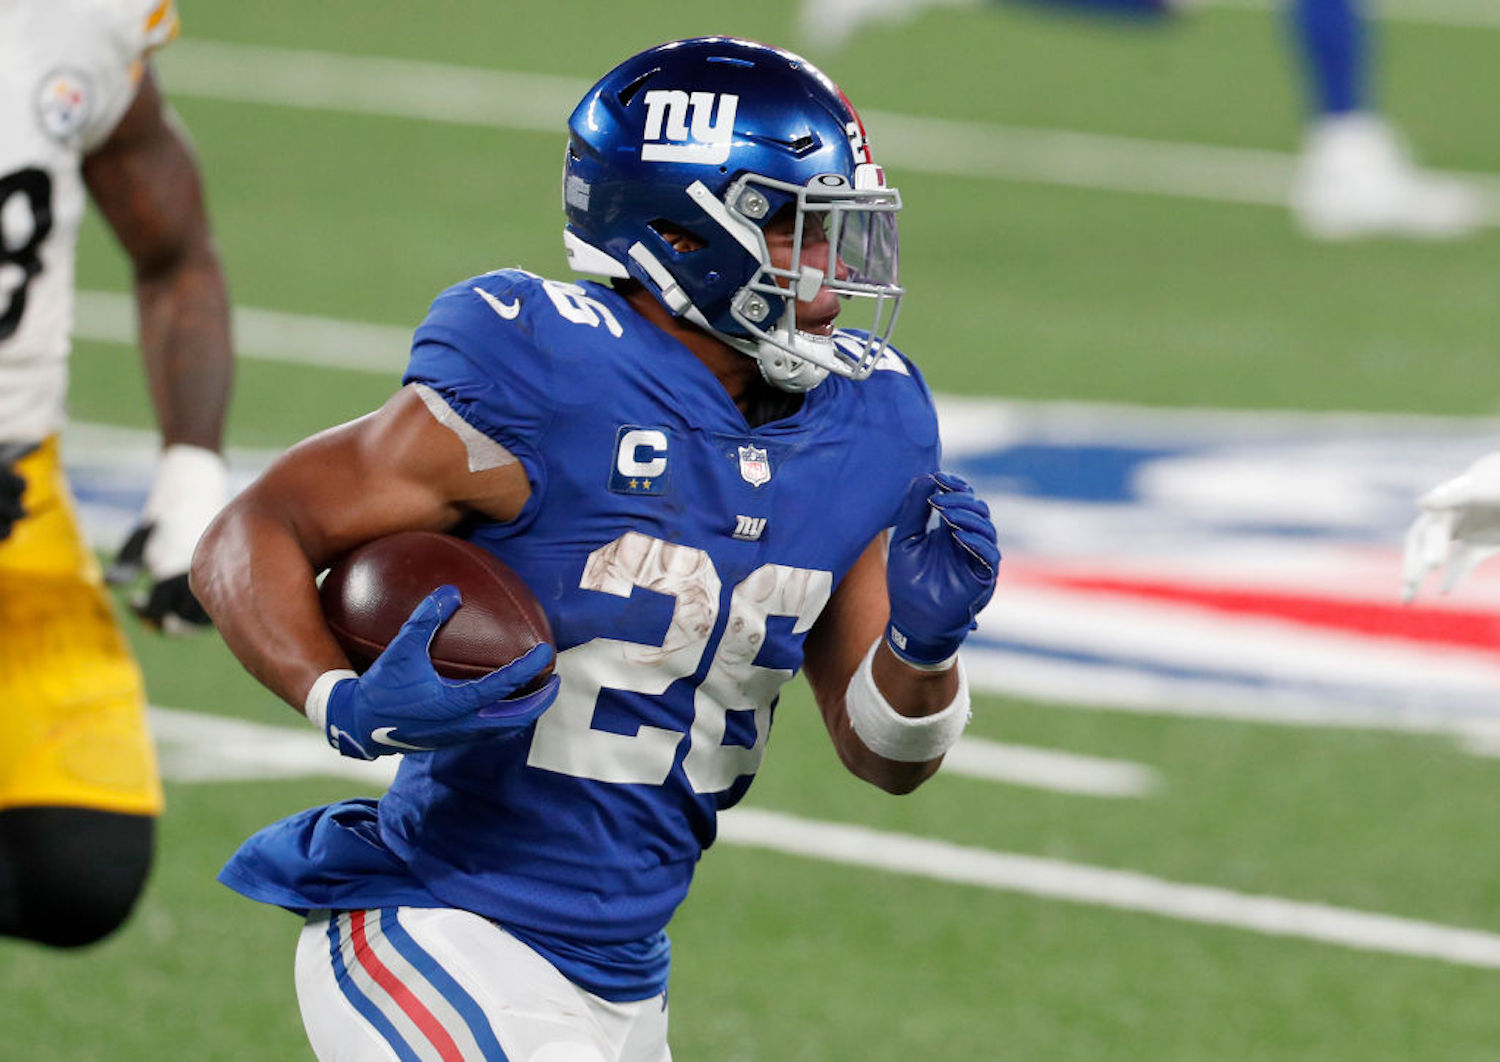 The Giants Just Suffered a Devastating Blow With the Loss of Their Generational Star